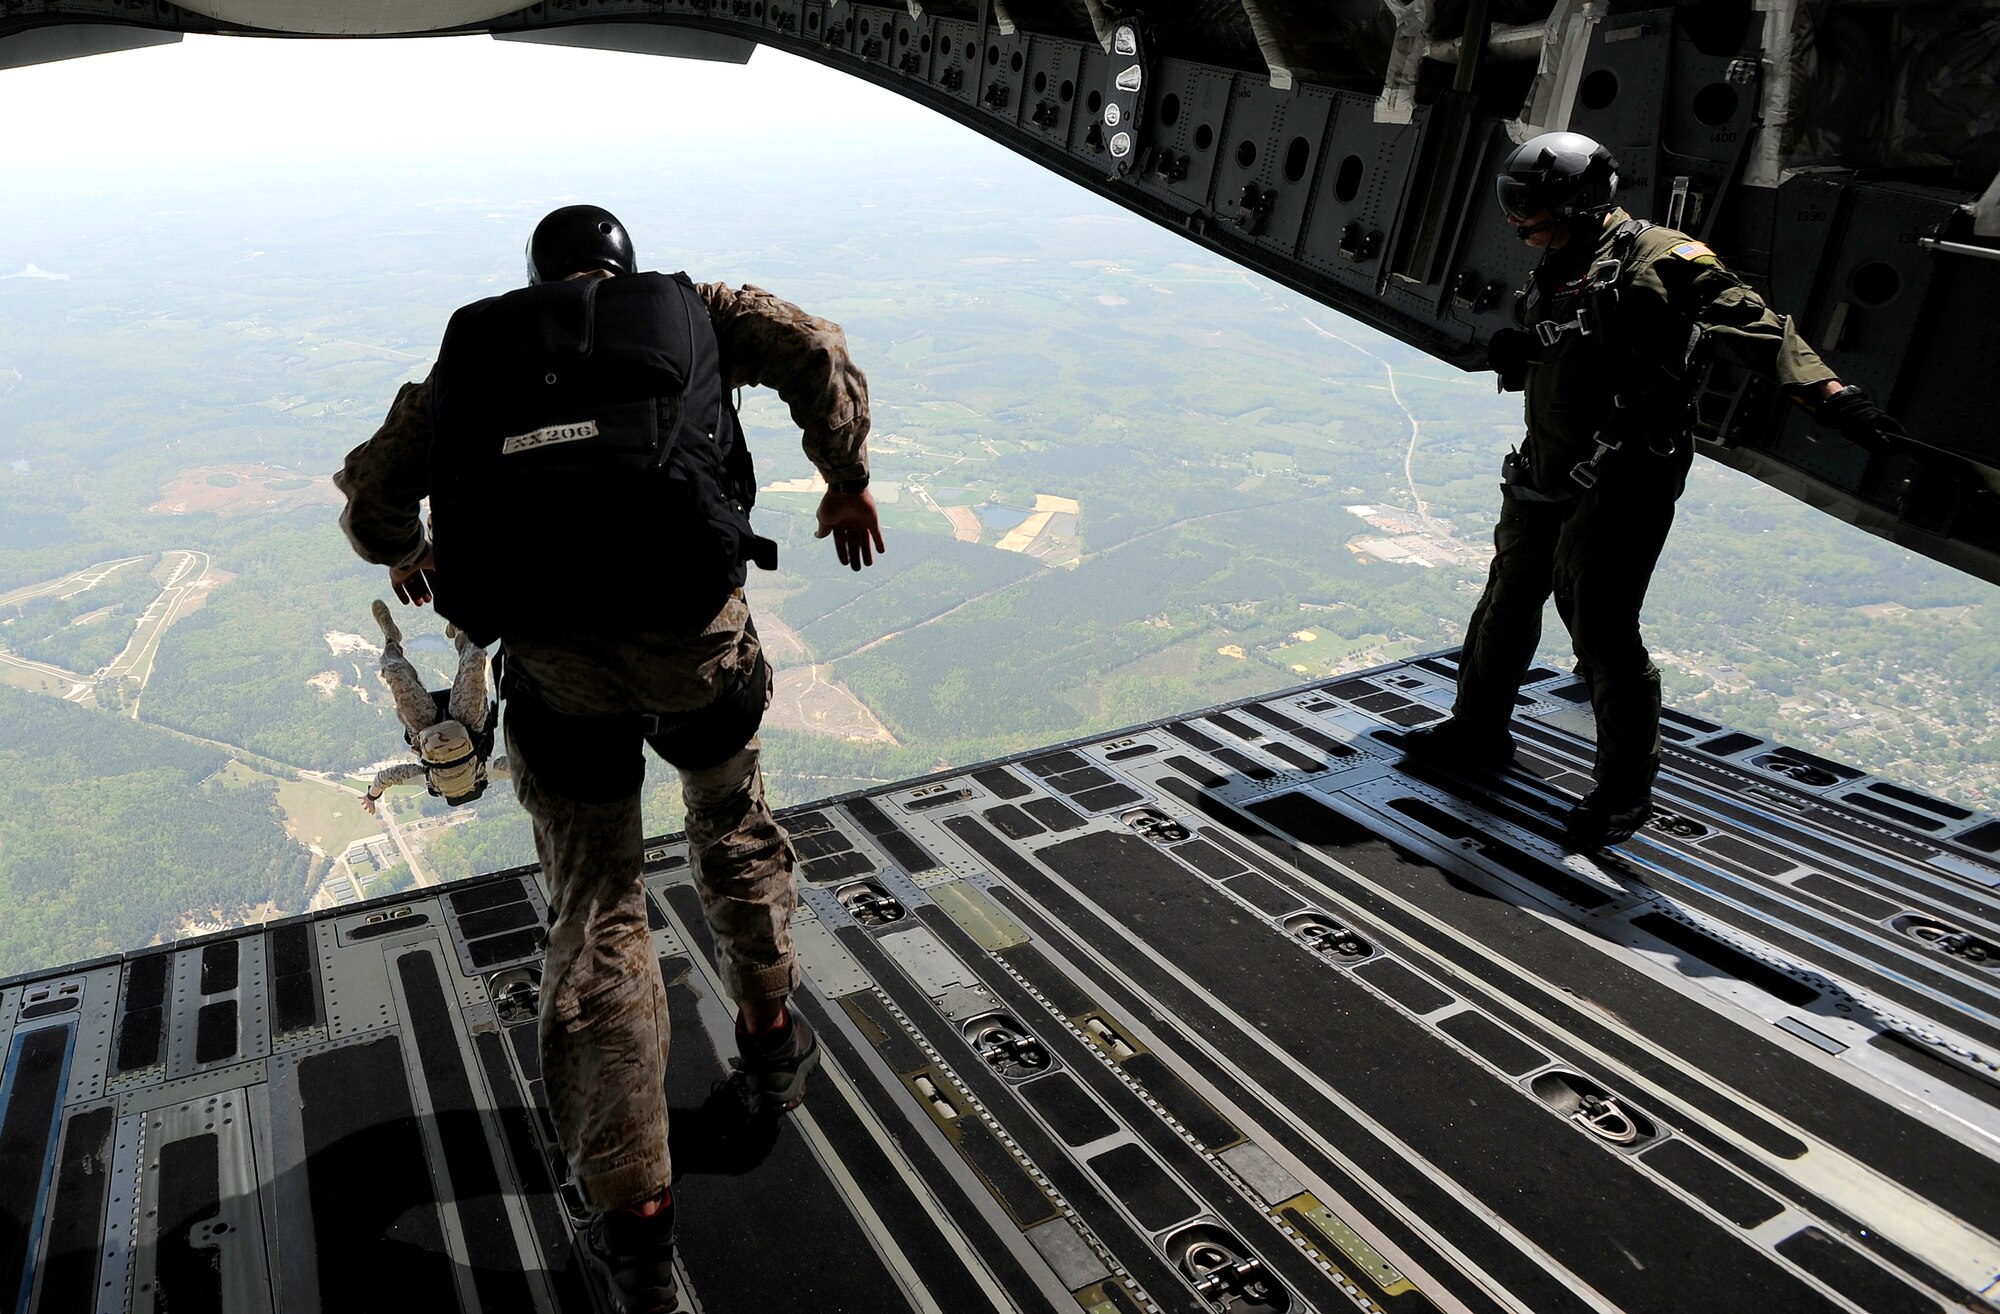 Navy SEALs jump from the ramp of a C-17 Globemaster III over Fort Picket Maneuver Training Center, Va., as Tech. Sgt. Justin Mulder looks on, April 15.  The jump was part of joint training exercise with the 517th Airlift Squadron from Elmendorf Air Force Base, Alaska. The training consisted of high altitude, high opening and high altitude, low opening jumps between 5,000 and 12,500 feet. Sergeant Mulder is a loadmaster with the 517th AS.  (Air Force photo by Staff Sgt. Brian Ferguson)